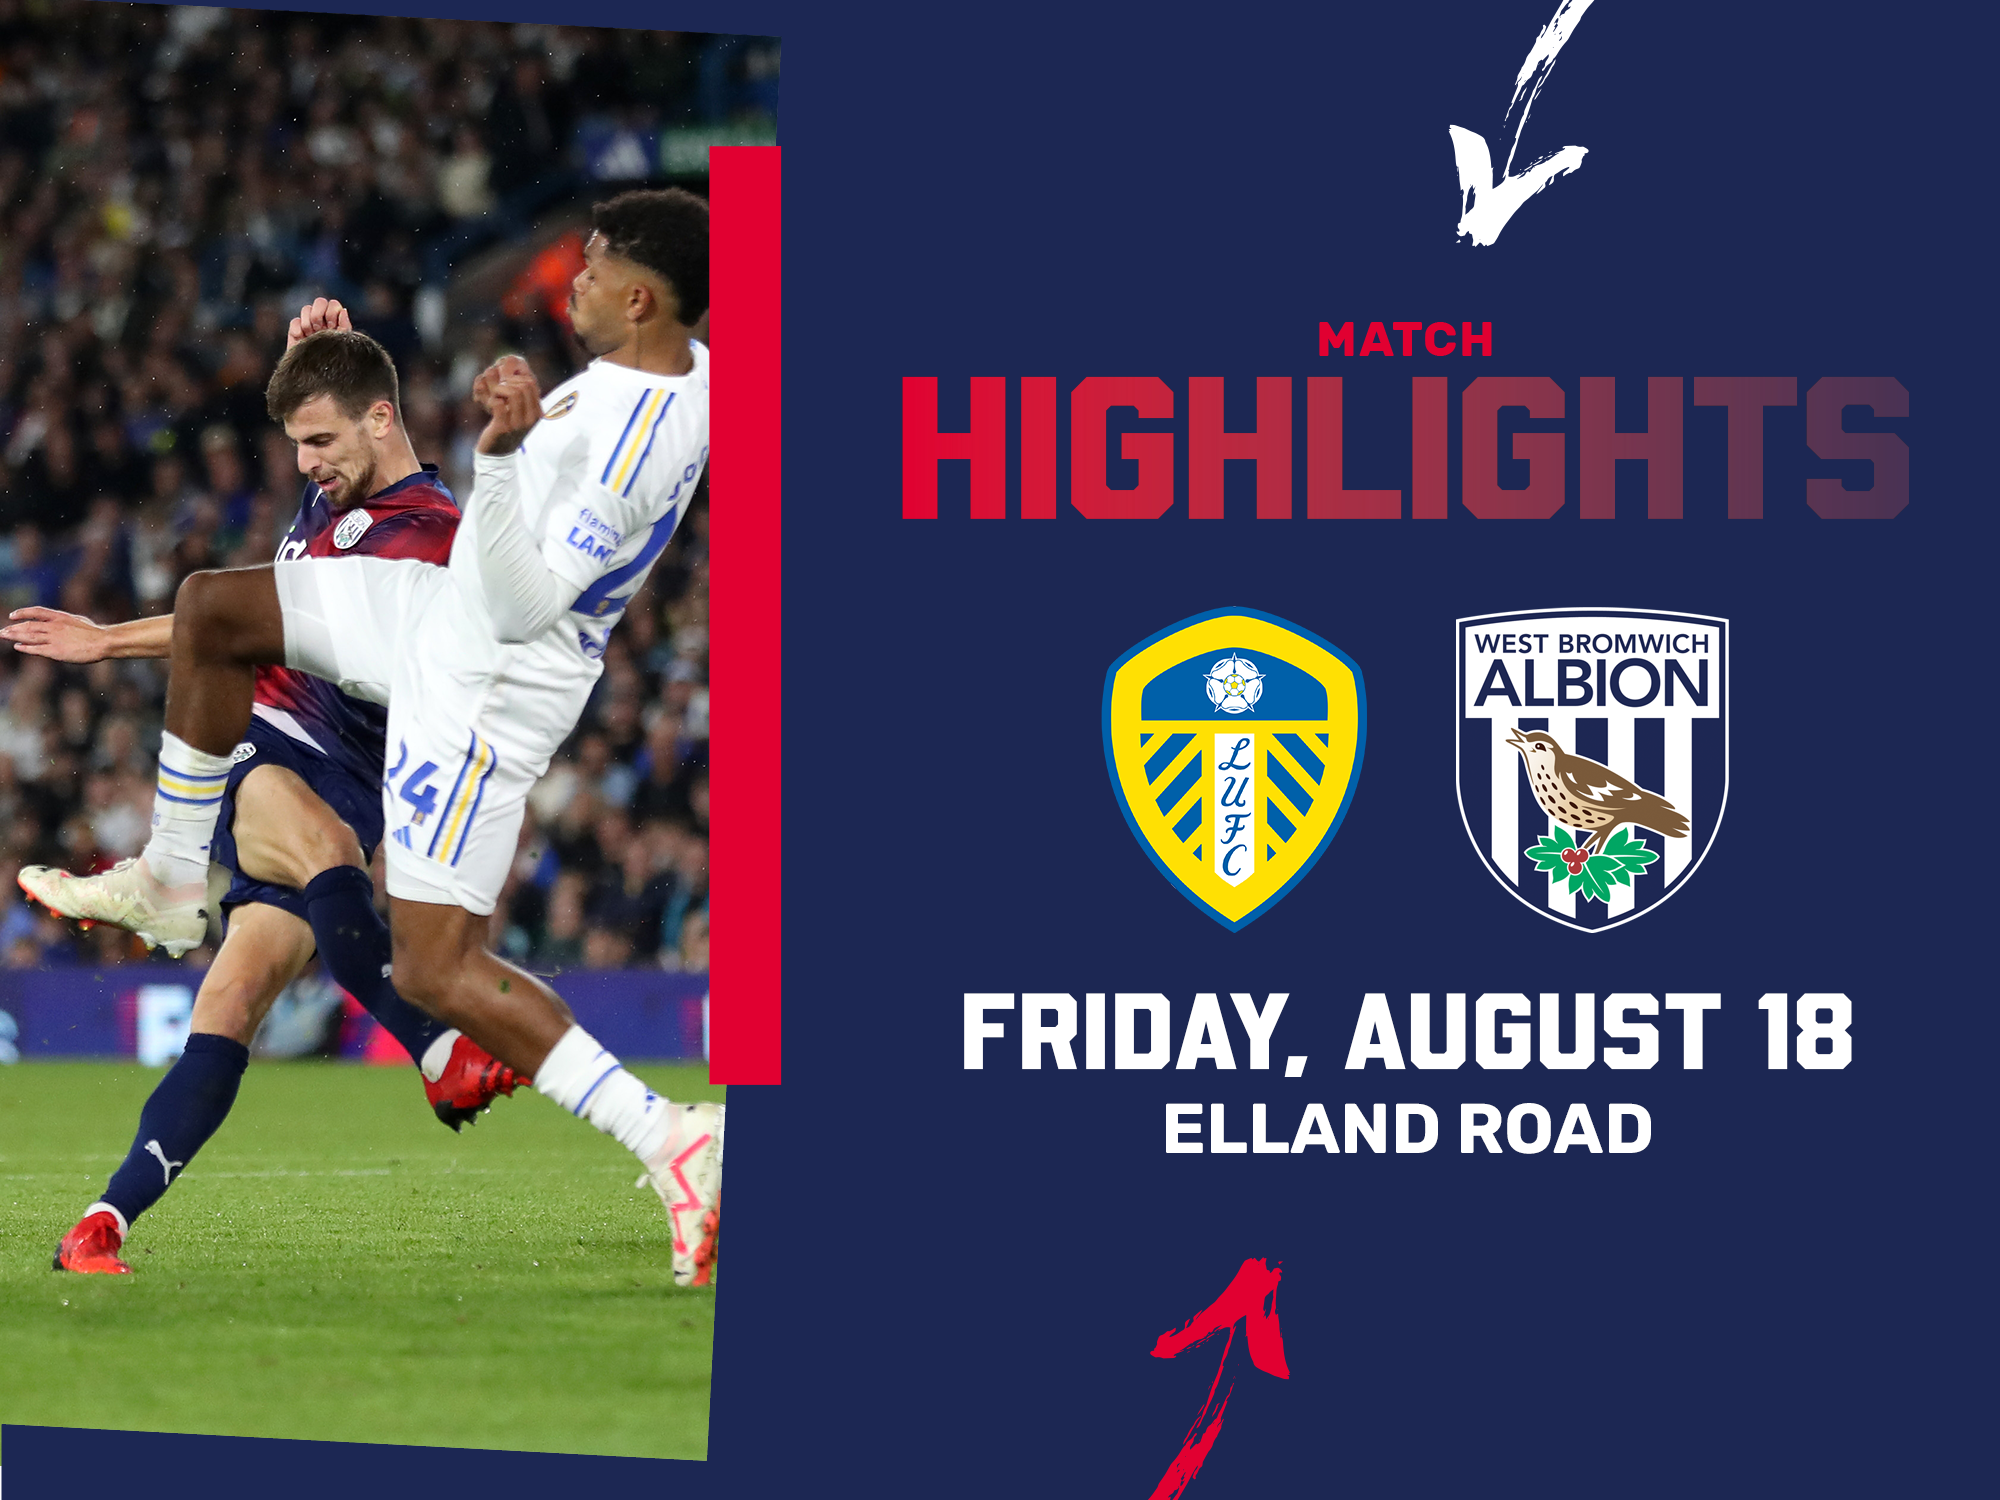 A photo graphic for highlights of Albion's league clash with Leeds United